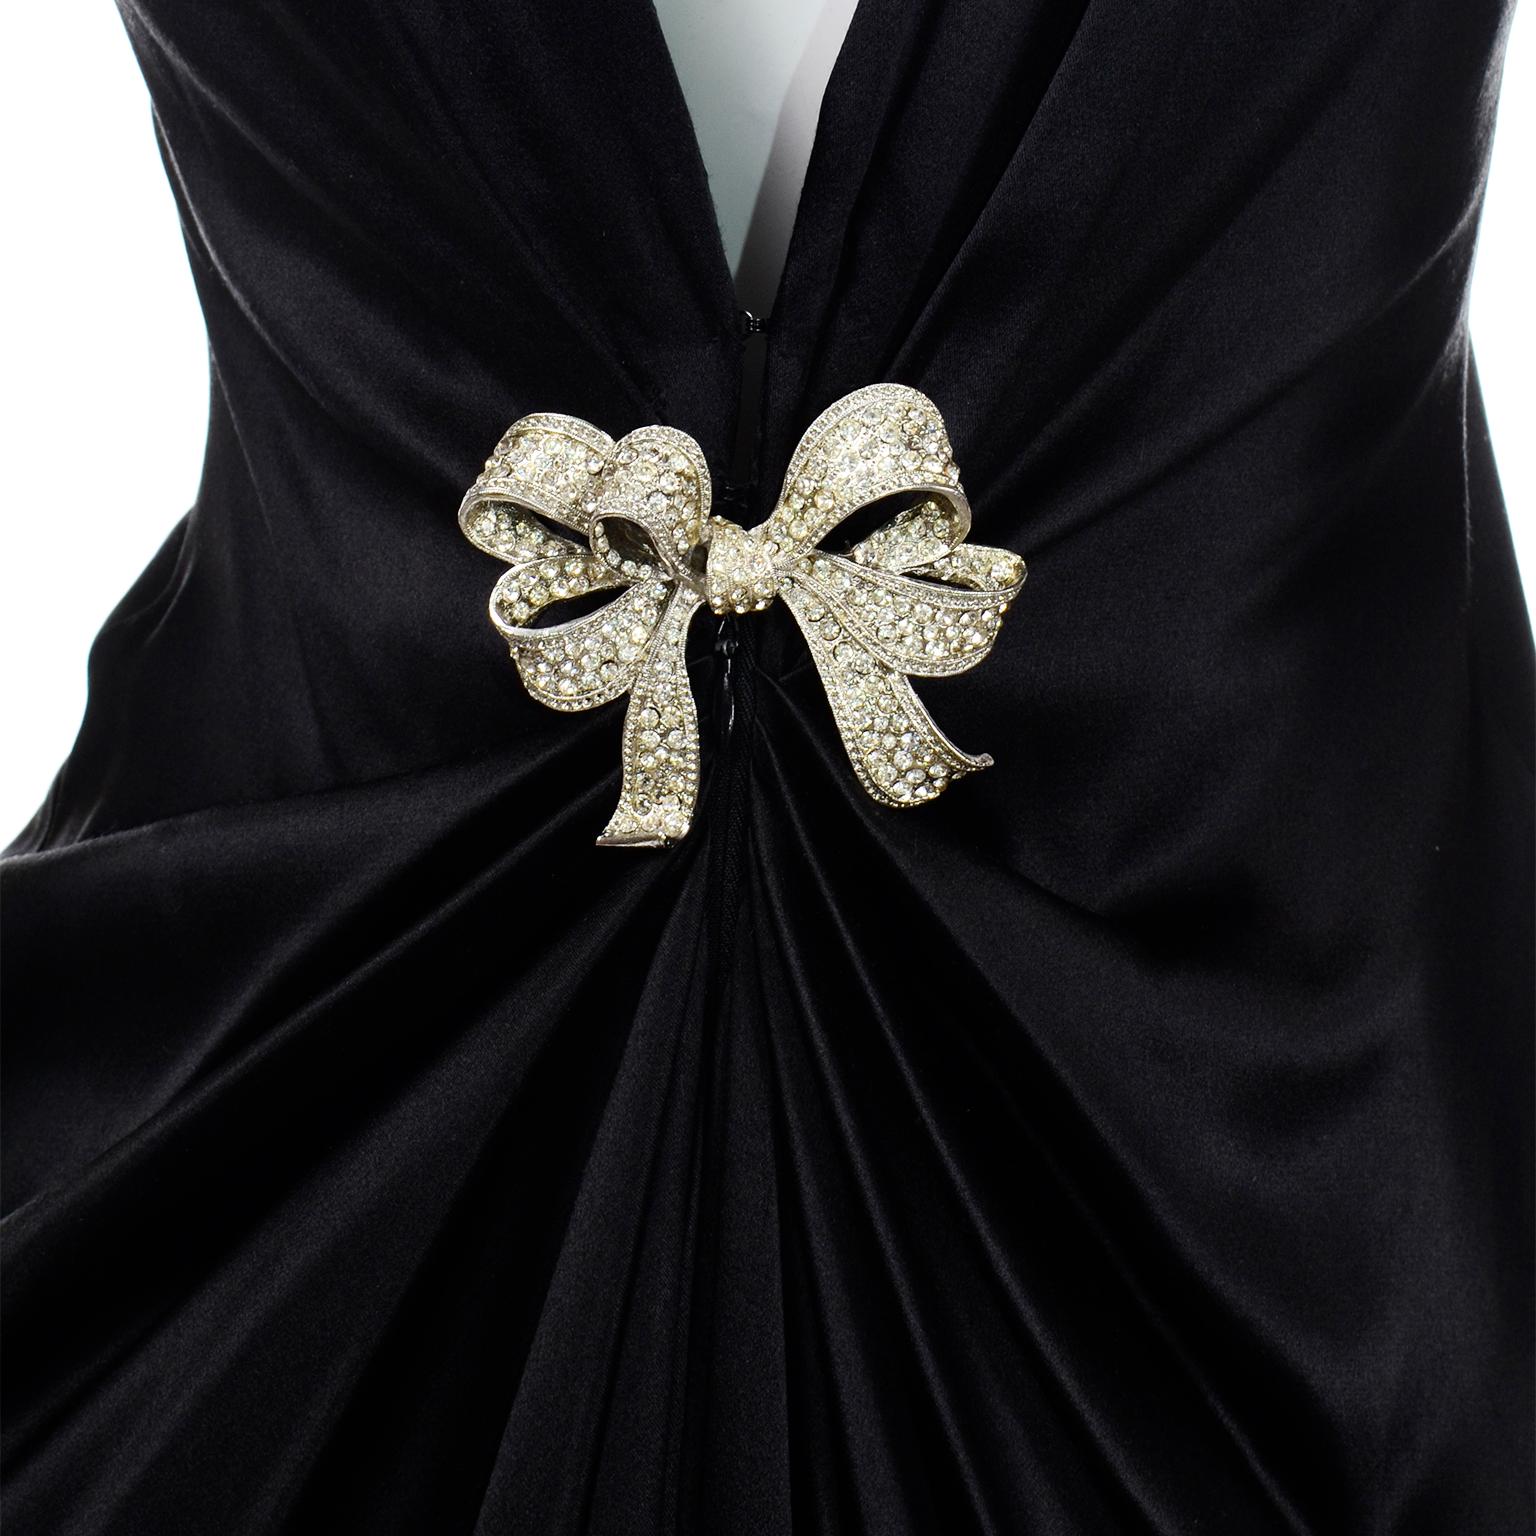 Fragment of a Victorian dress with a brooch. - Stock Photo [69840427] -  PIXTA